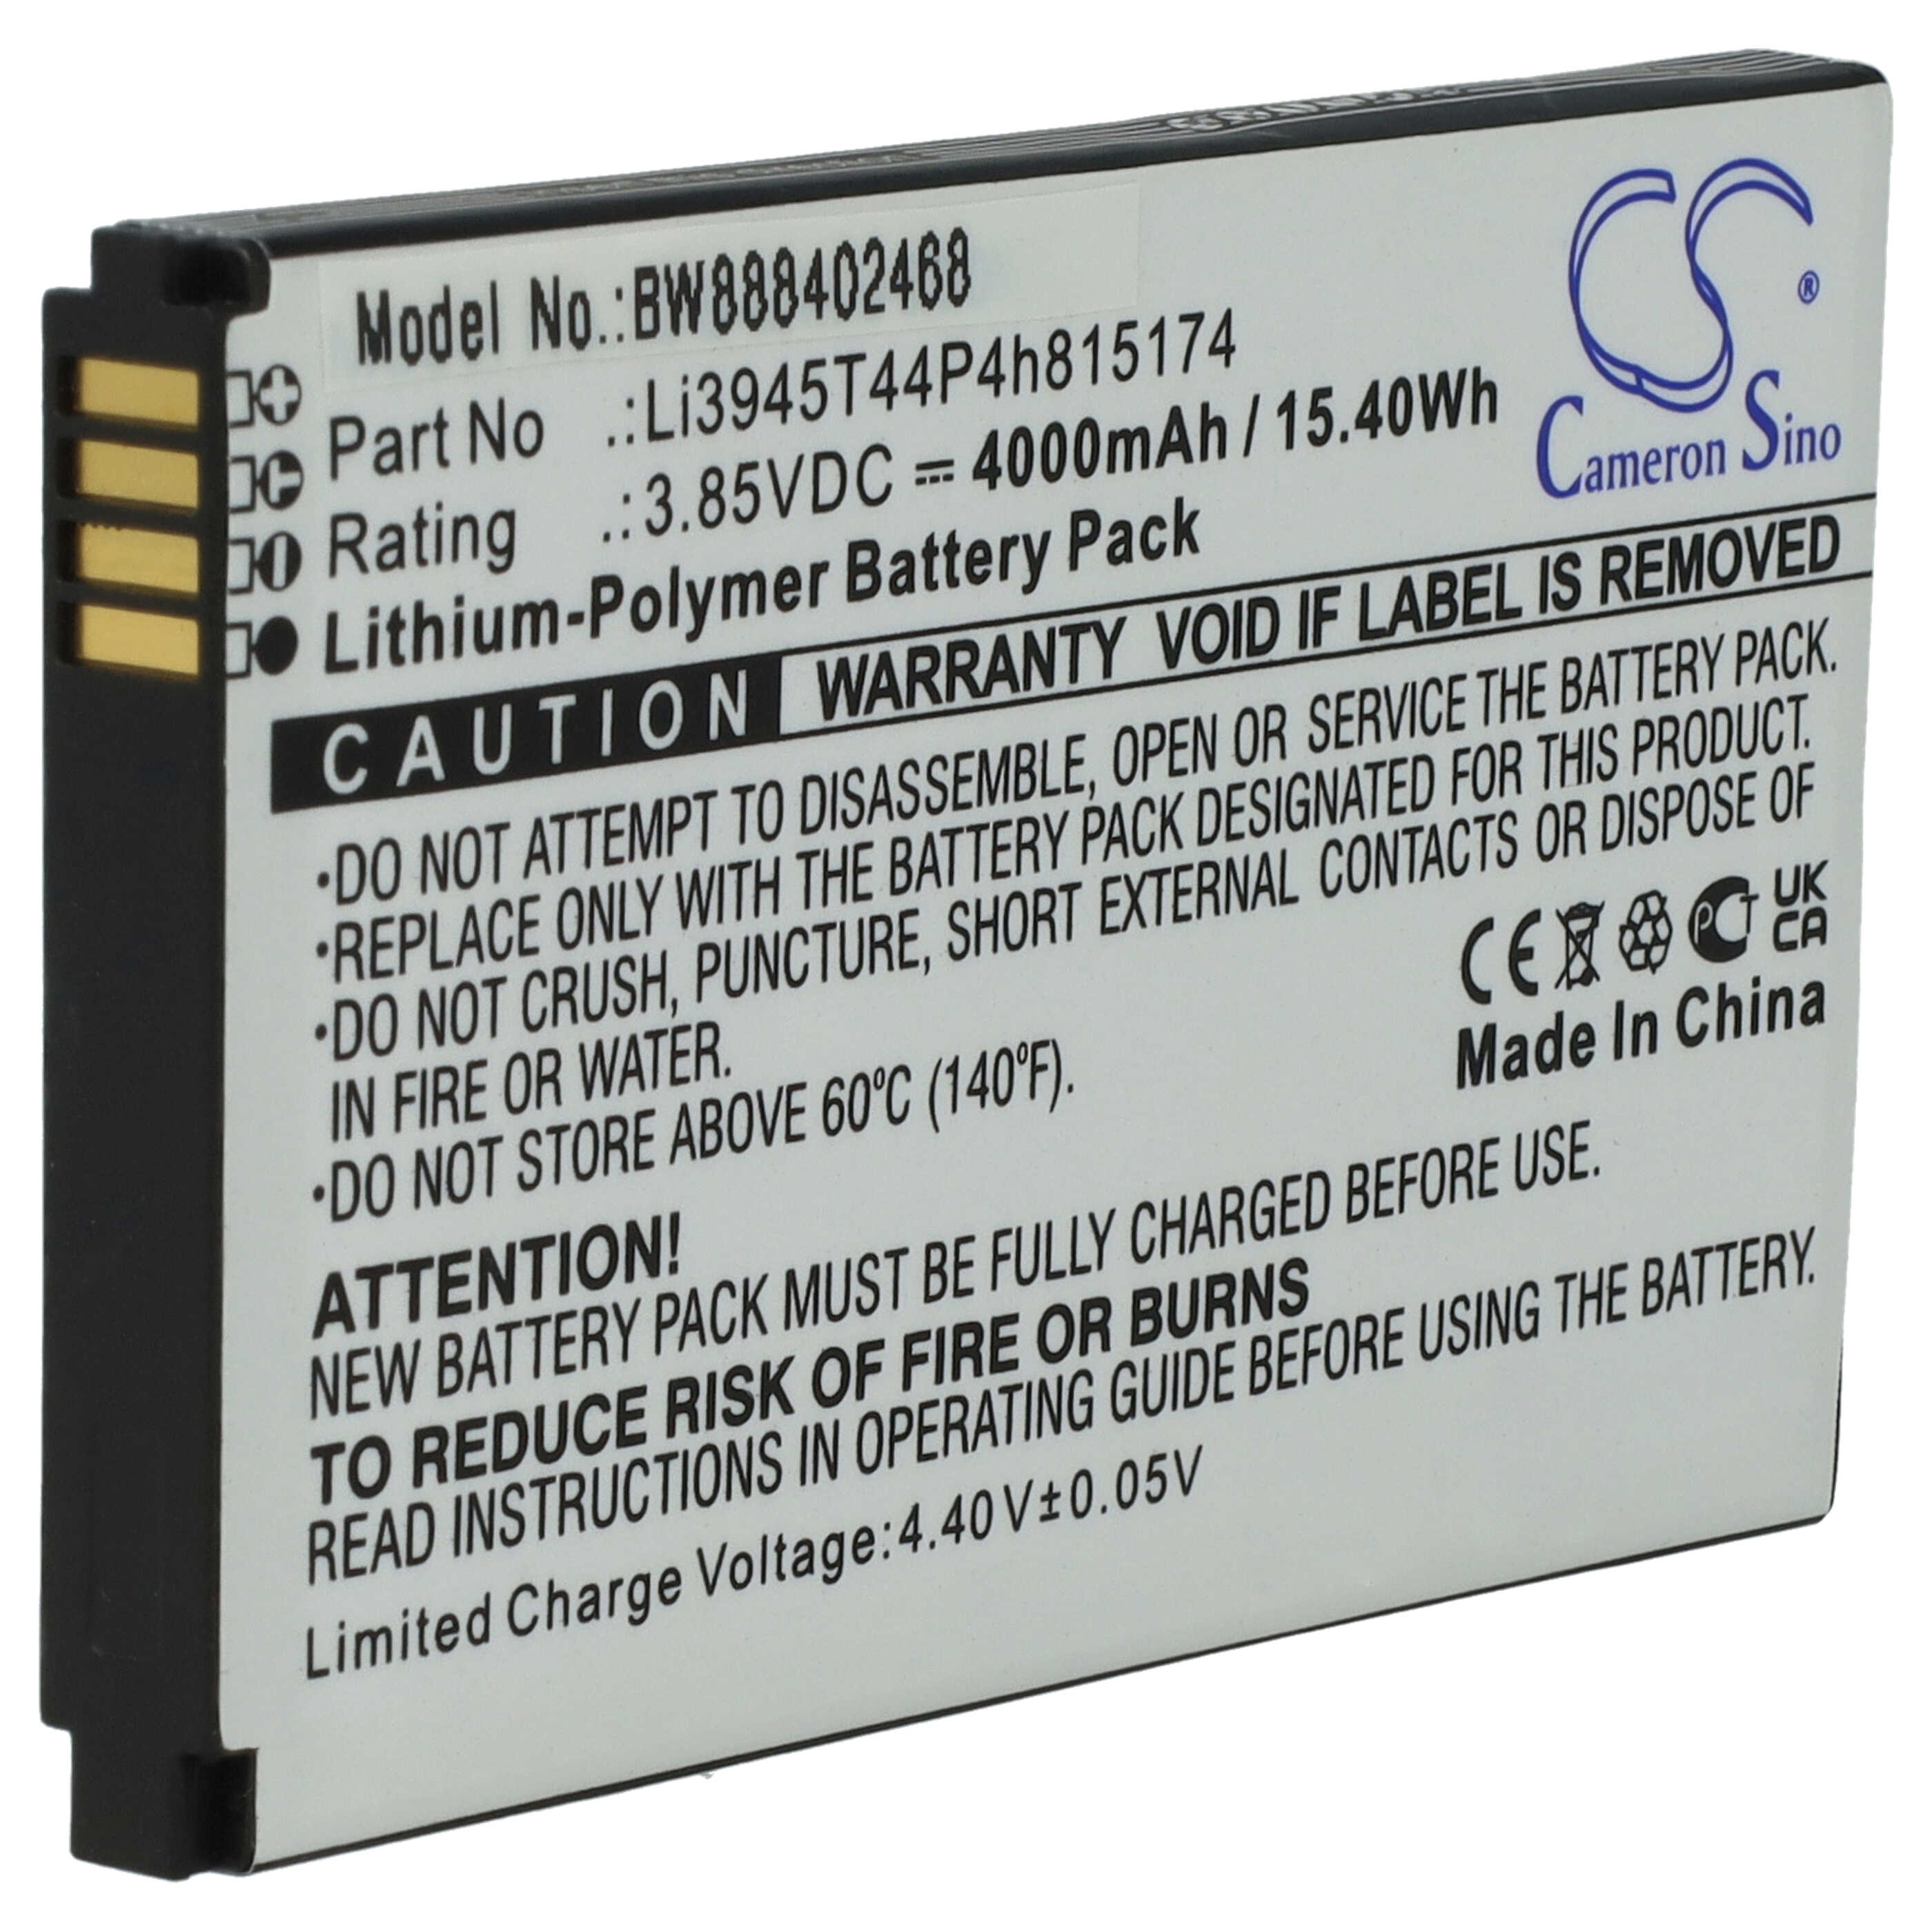 Mobile Router Battery Replacement for ZTE Li3945T44P4h815174 - 4000mAh 3.85V Li-polymer